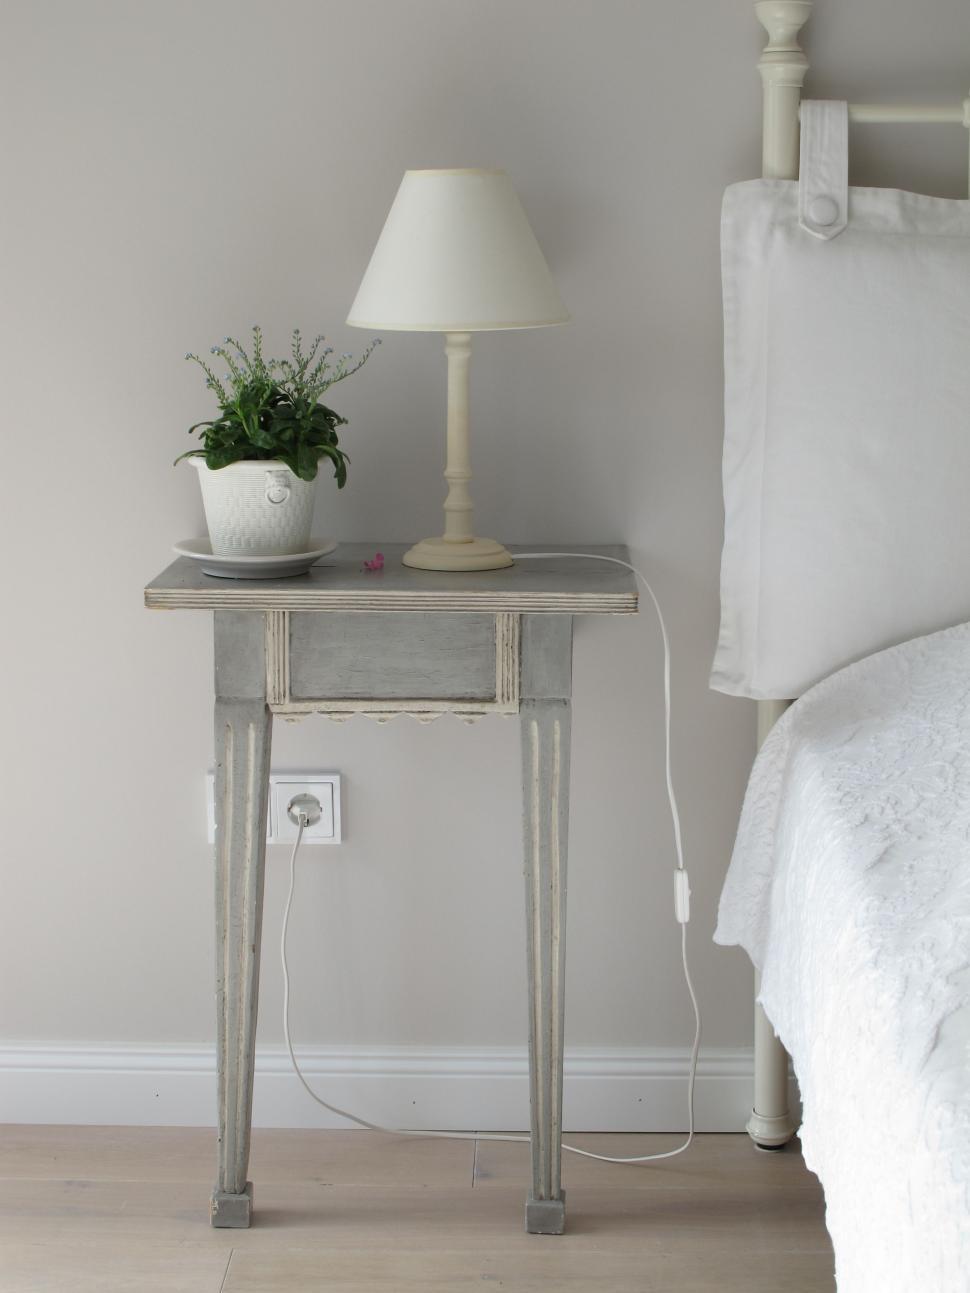 Free Image of Nightstand With Plant Beside Bed 